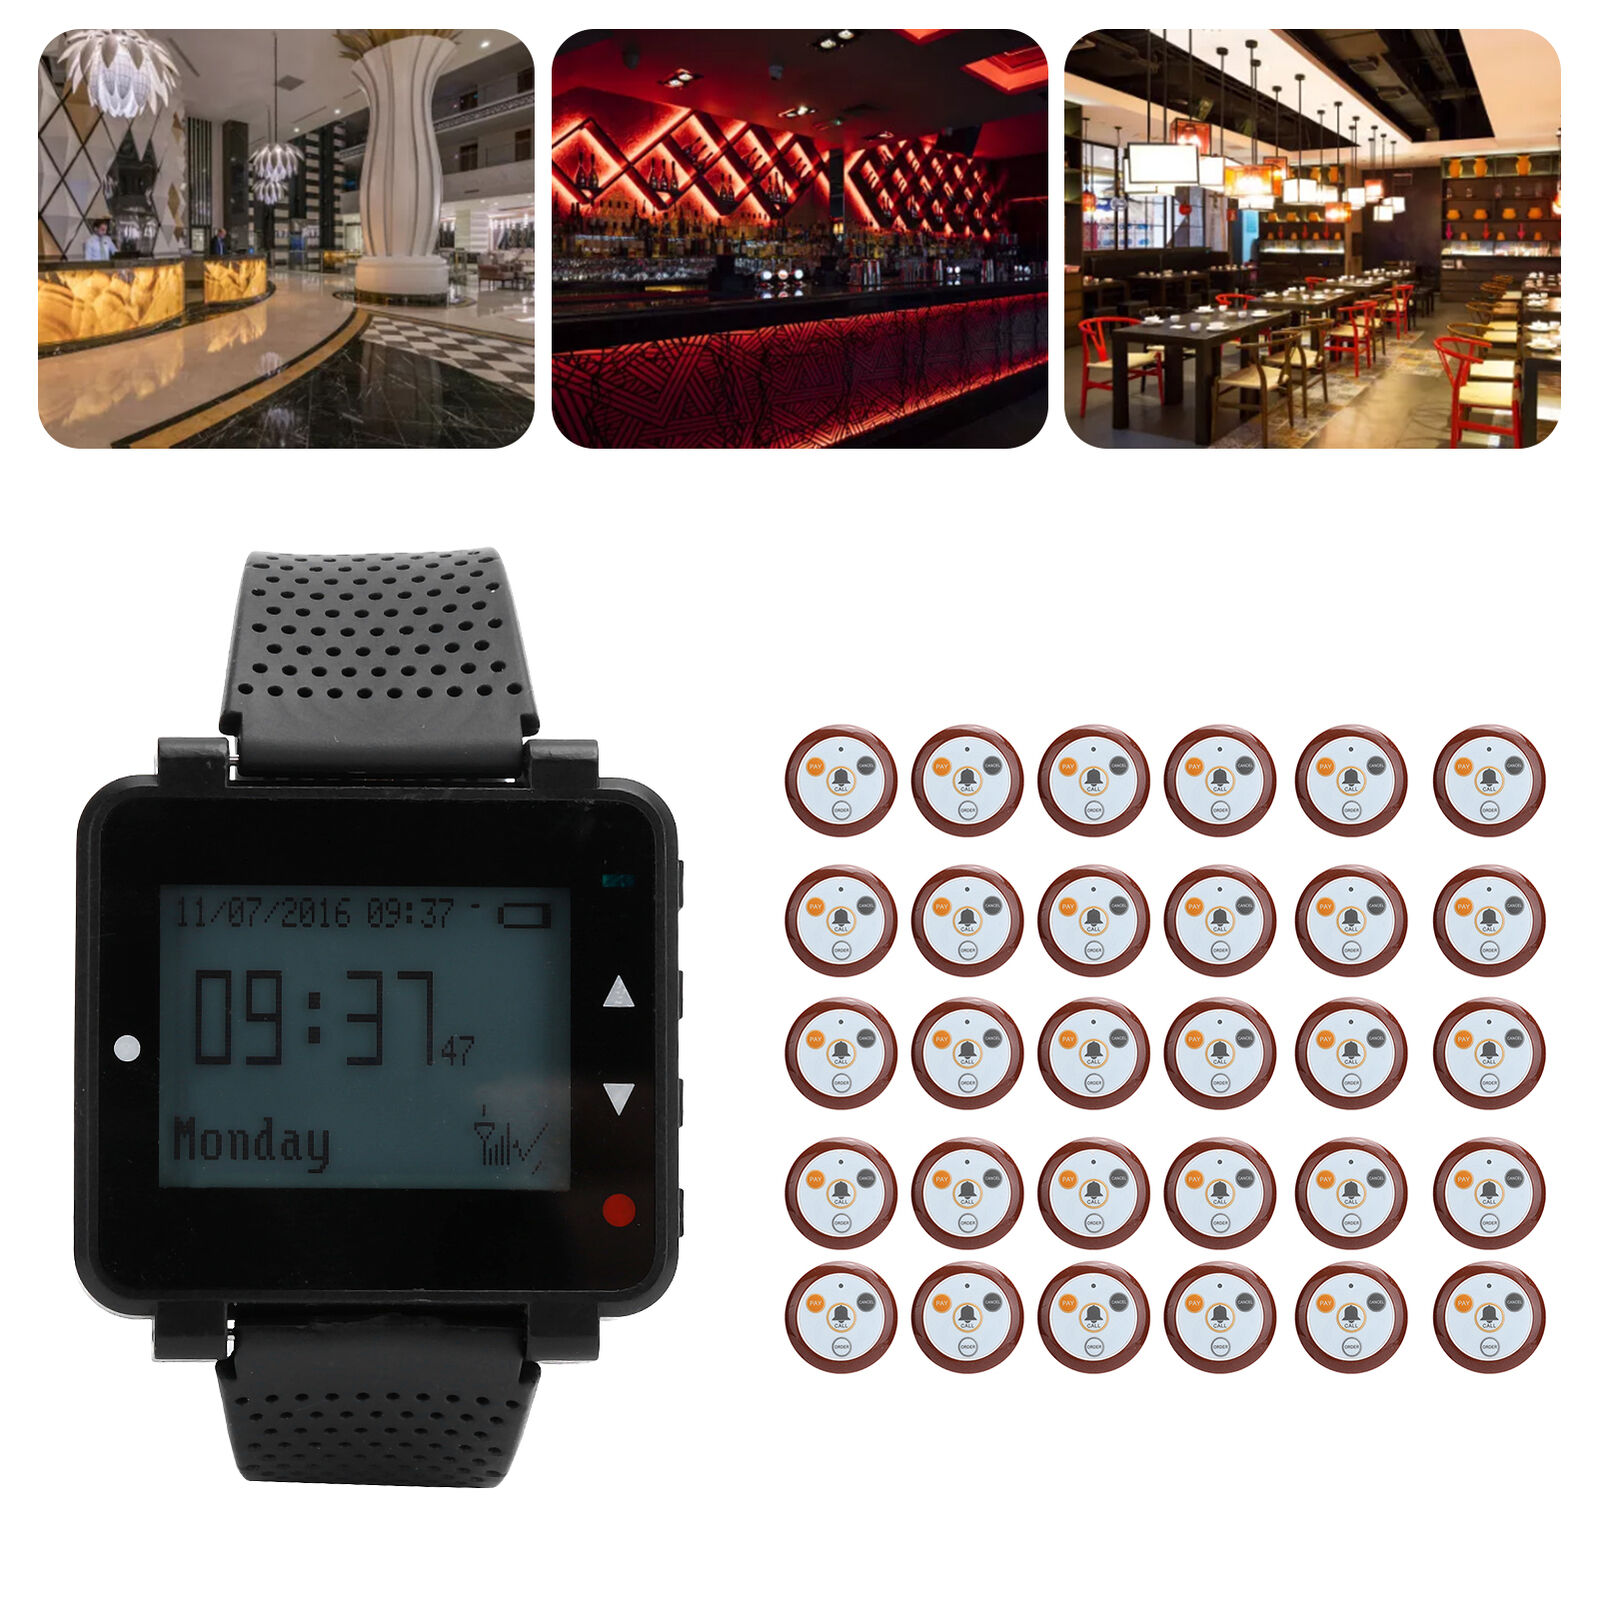 Restaurant Wireless Paging Calling System Watch Receiver Coaster 30Pcs Pagers